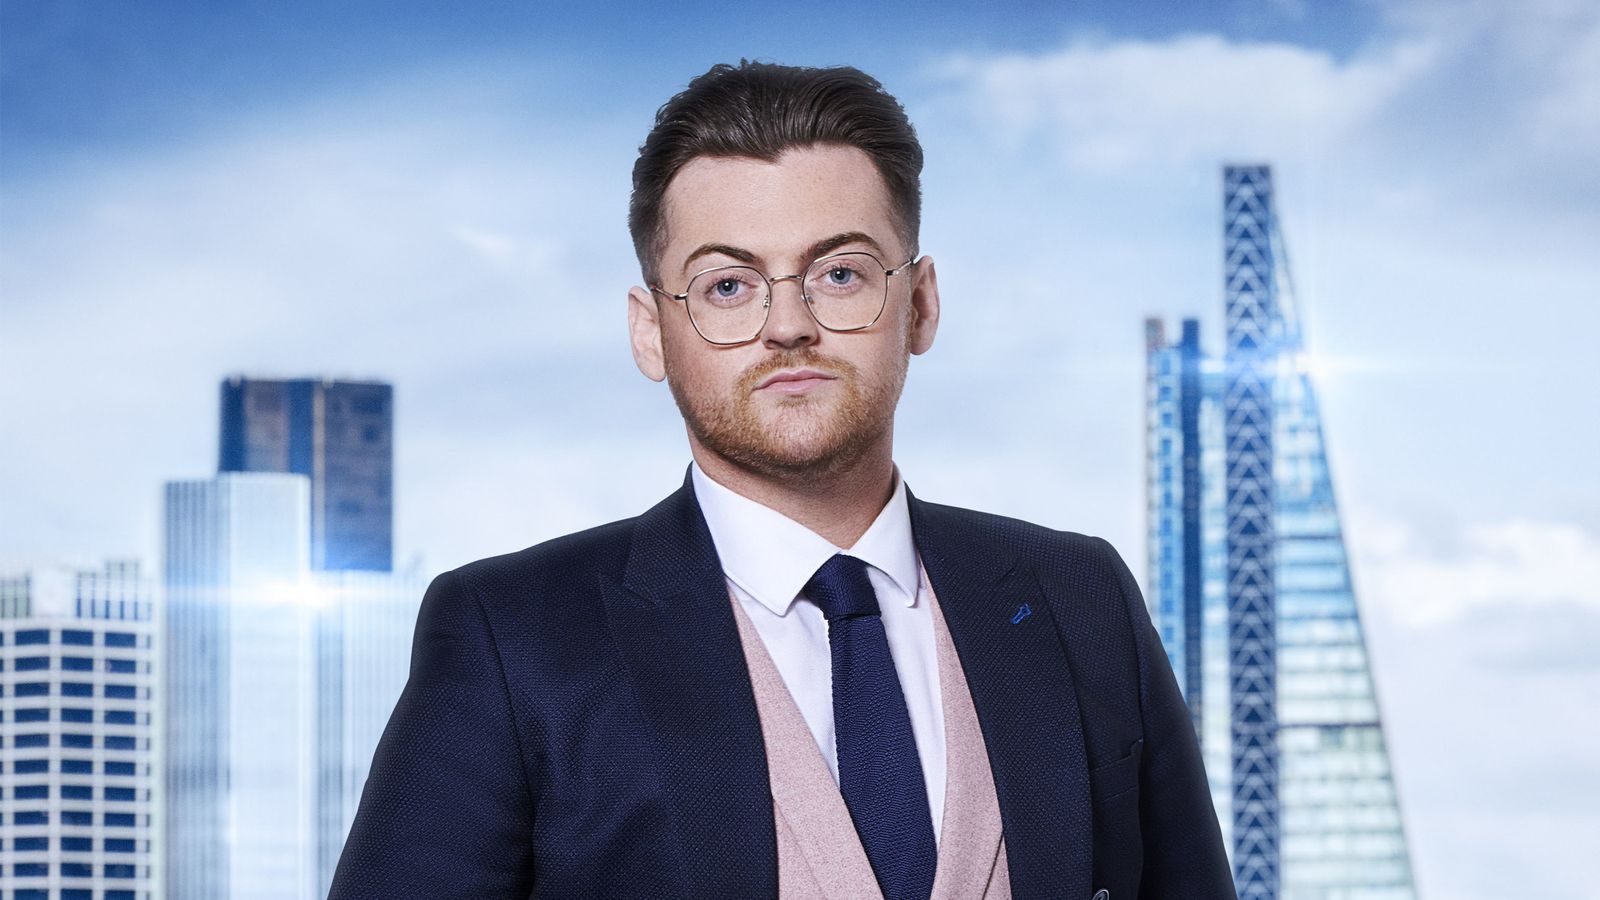 The Apprentice contestant Reece Donnelly addresses 'speculation' over why he left show